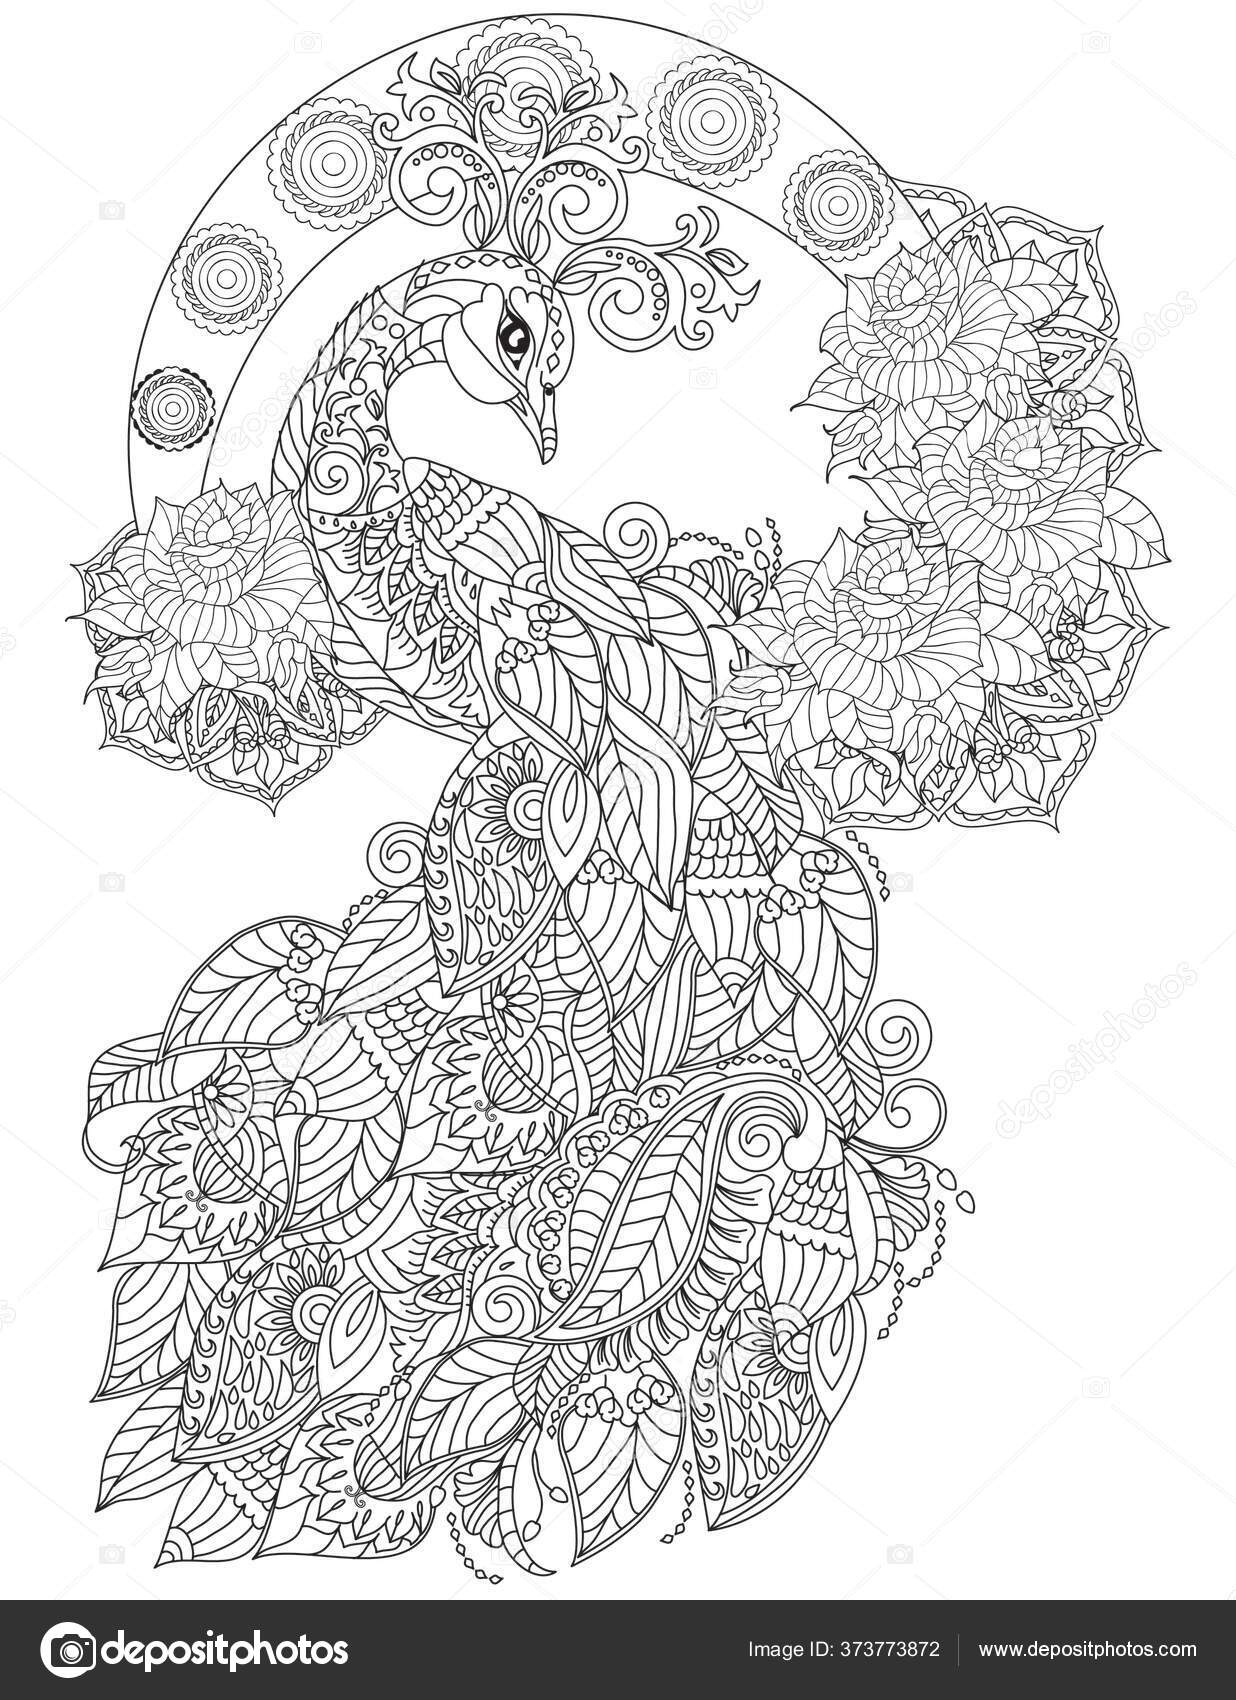 Download Digital Coloring Book Adults Coloring Book Cute Animals Birds Flowers Stock Photo By C Adelinrafael Gmail Com 373773872